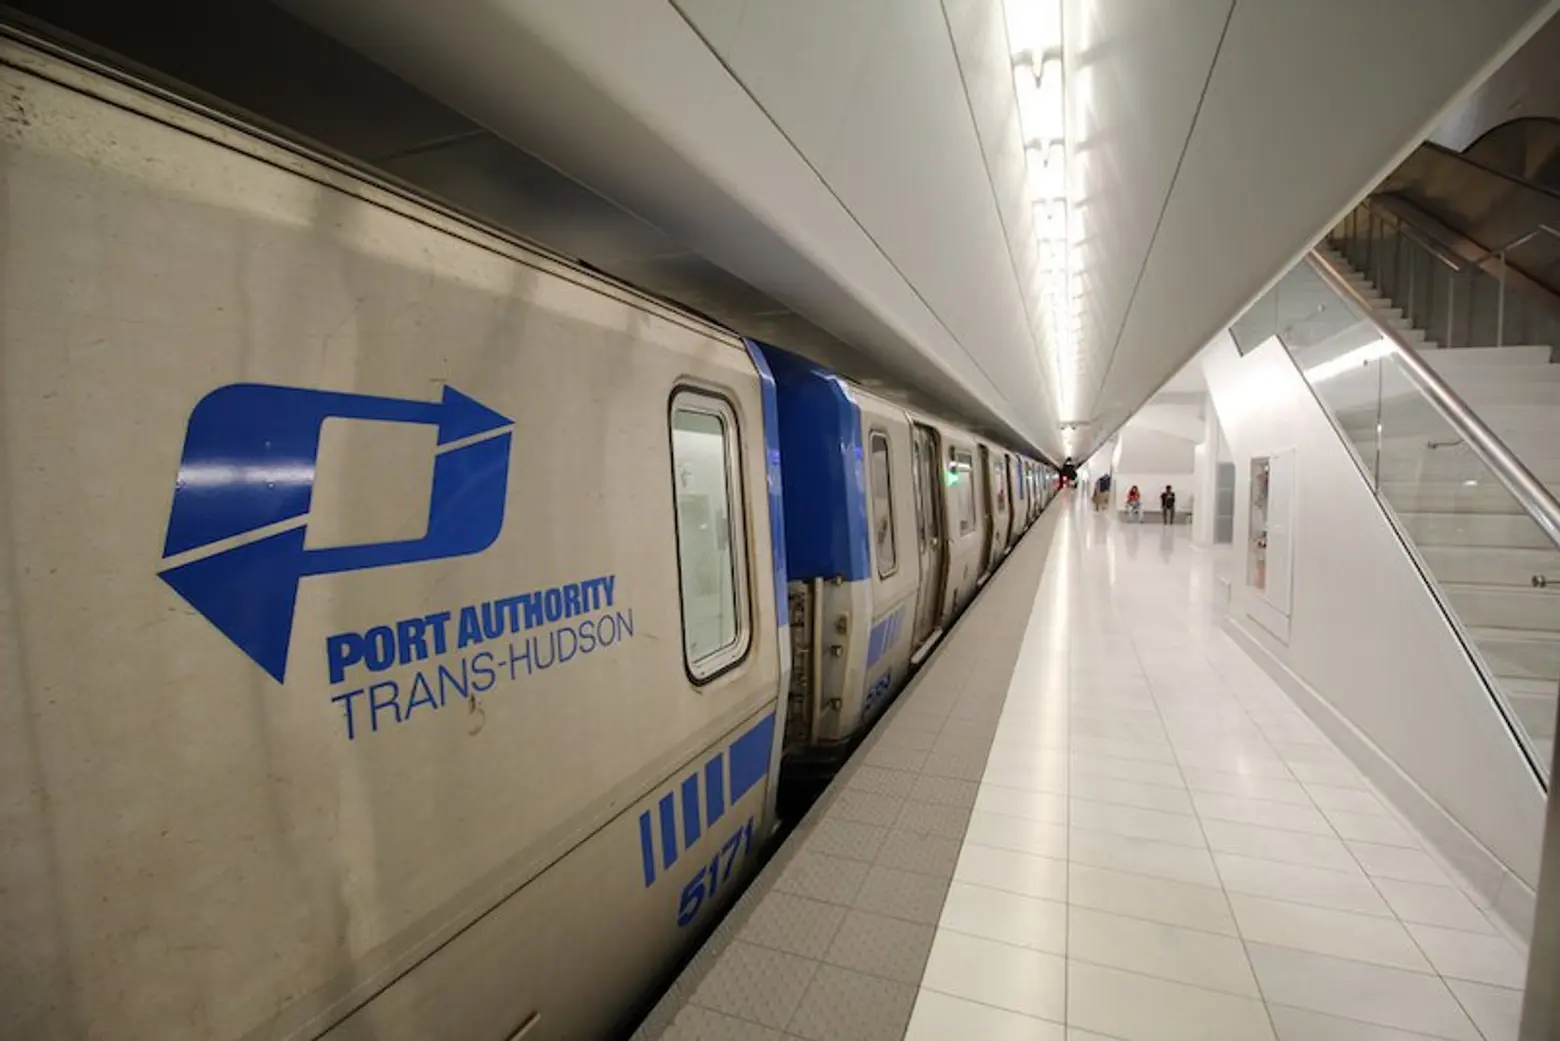 Port Authority reveals $1B plan to make PATH trains less crowded, more efficient